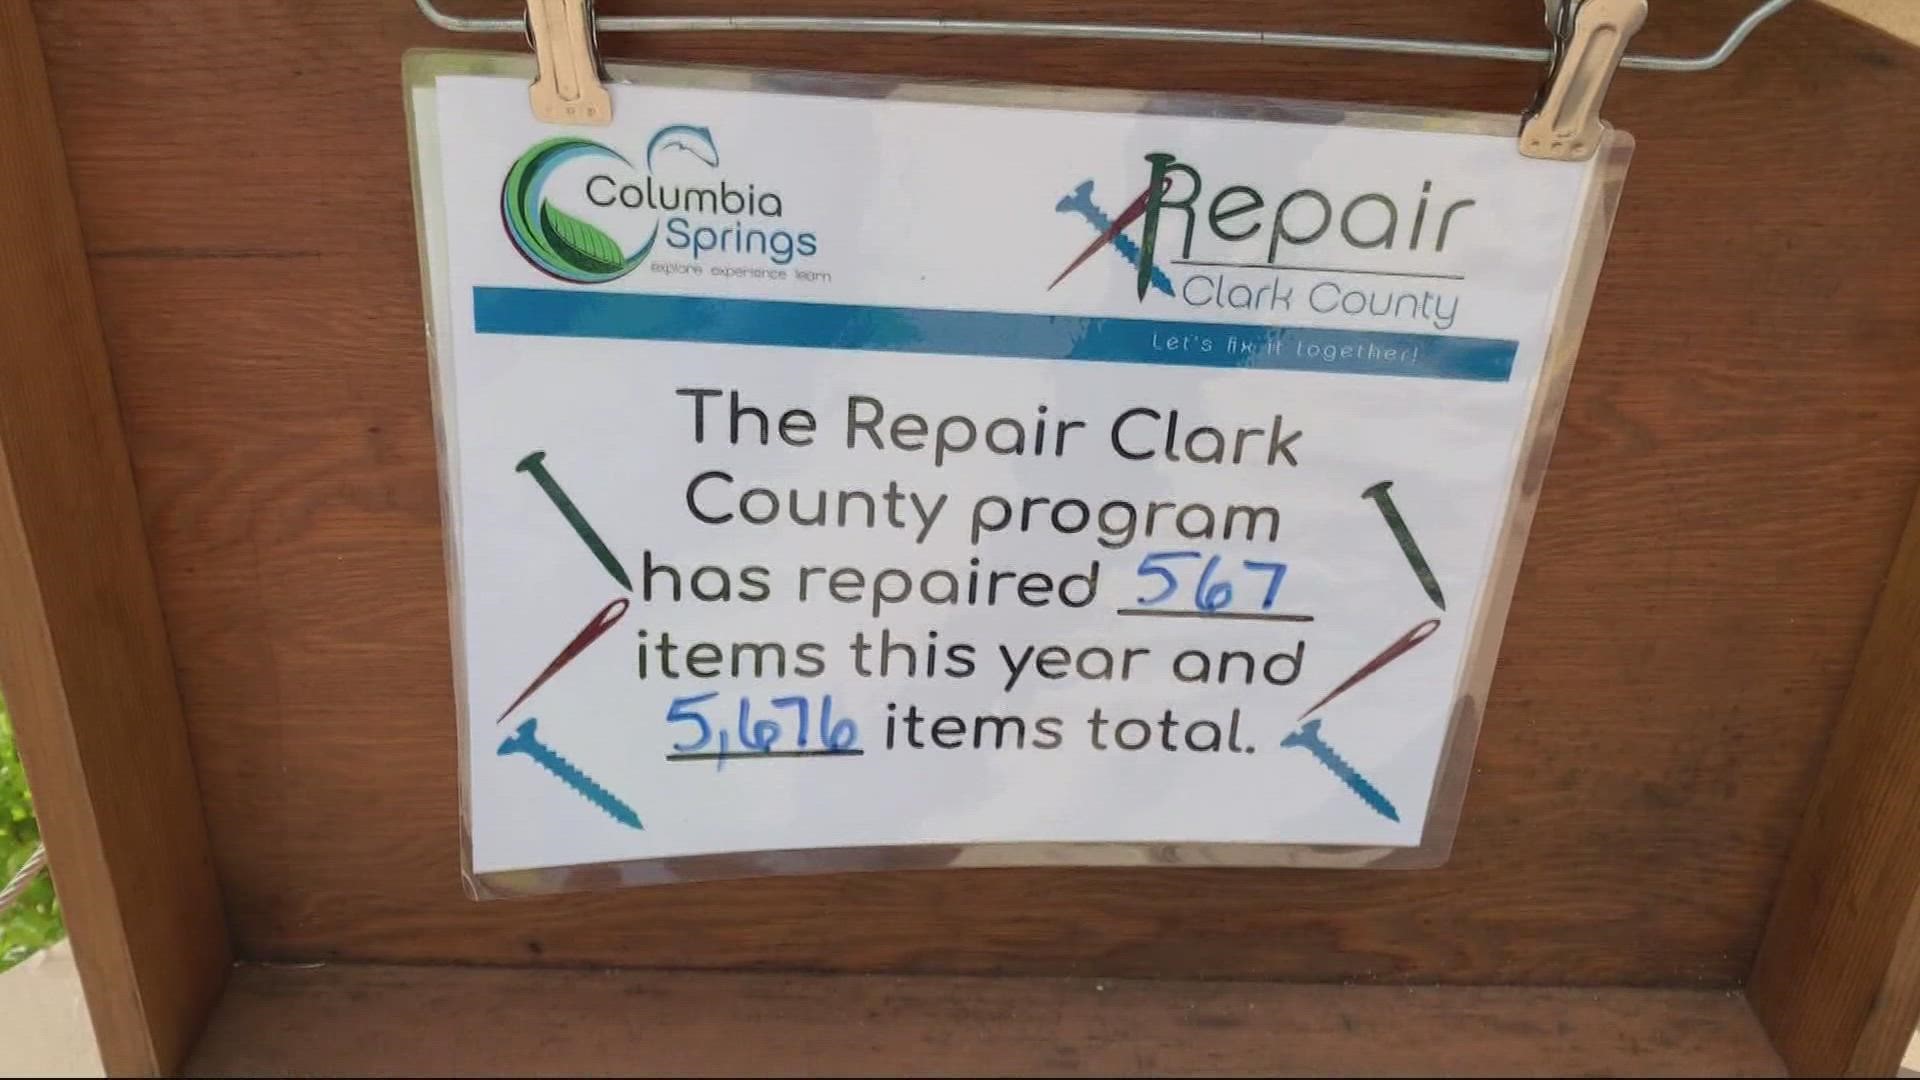 Is your tool or appliance on the fritz? Repair Clark County is back to hosting in-person drop-offs and repair events for those who need something fixed.